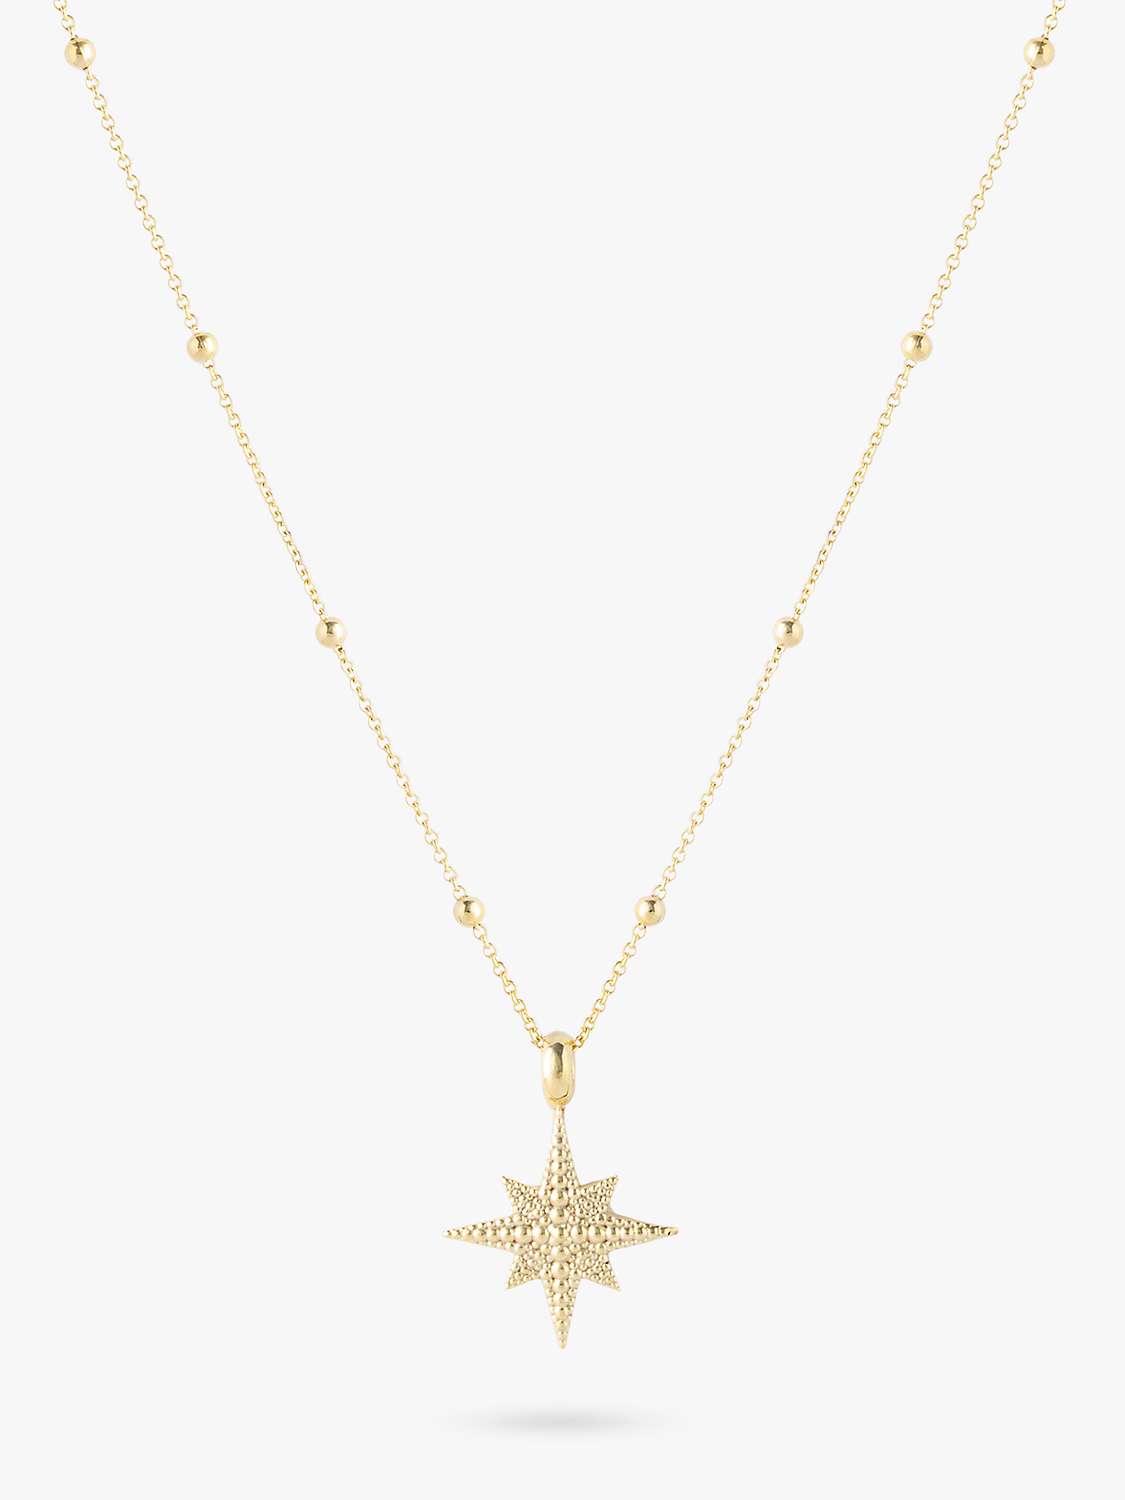 Buy LARNAUTI North Star Beaded Chain Star Pendant Necklace, Gold Online at johnlewis.com